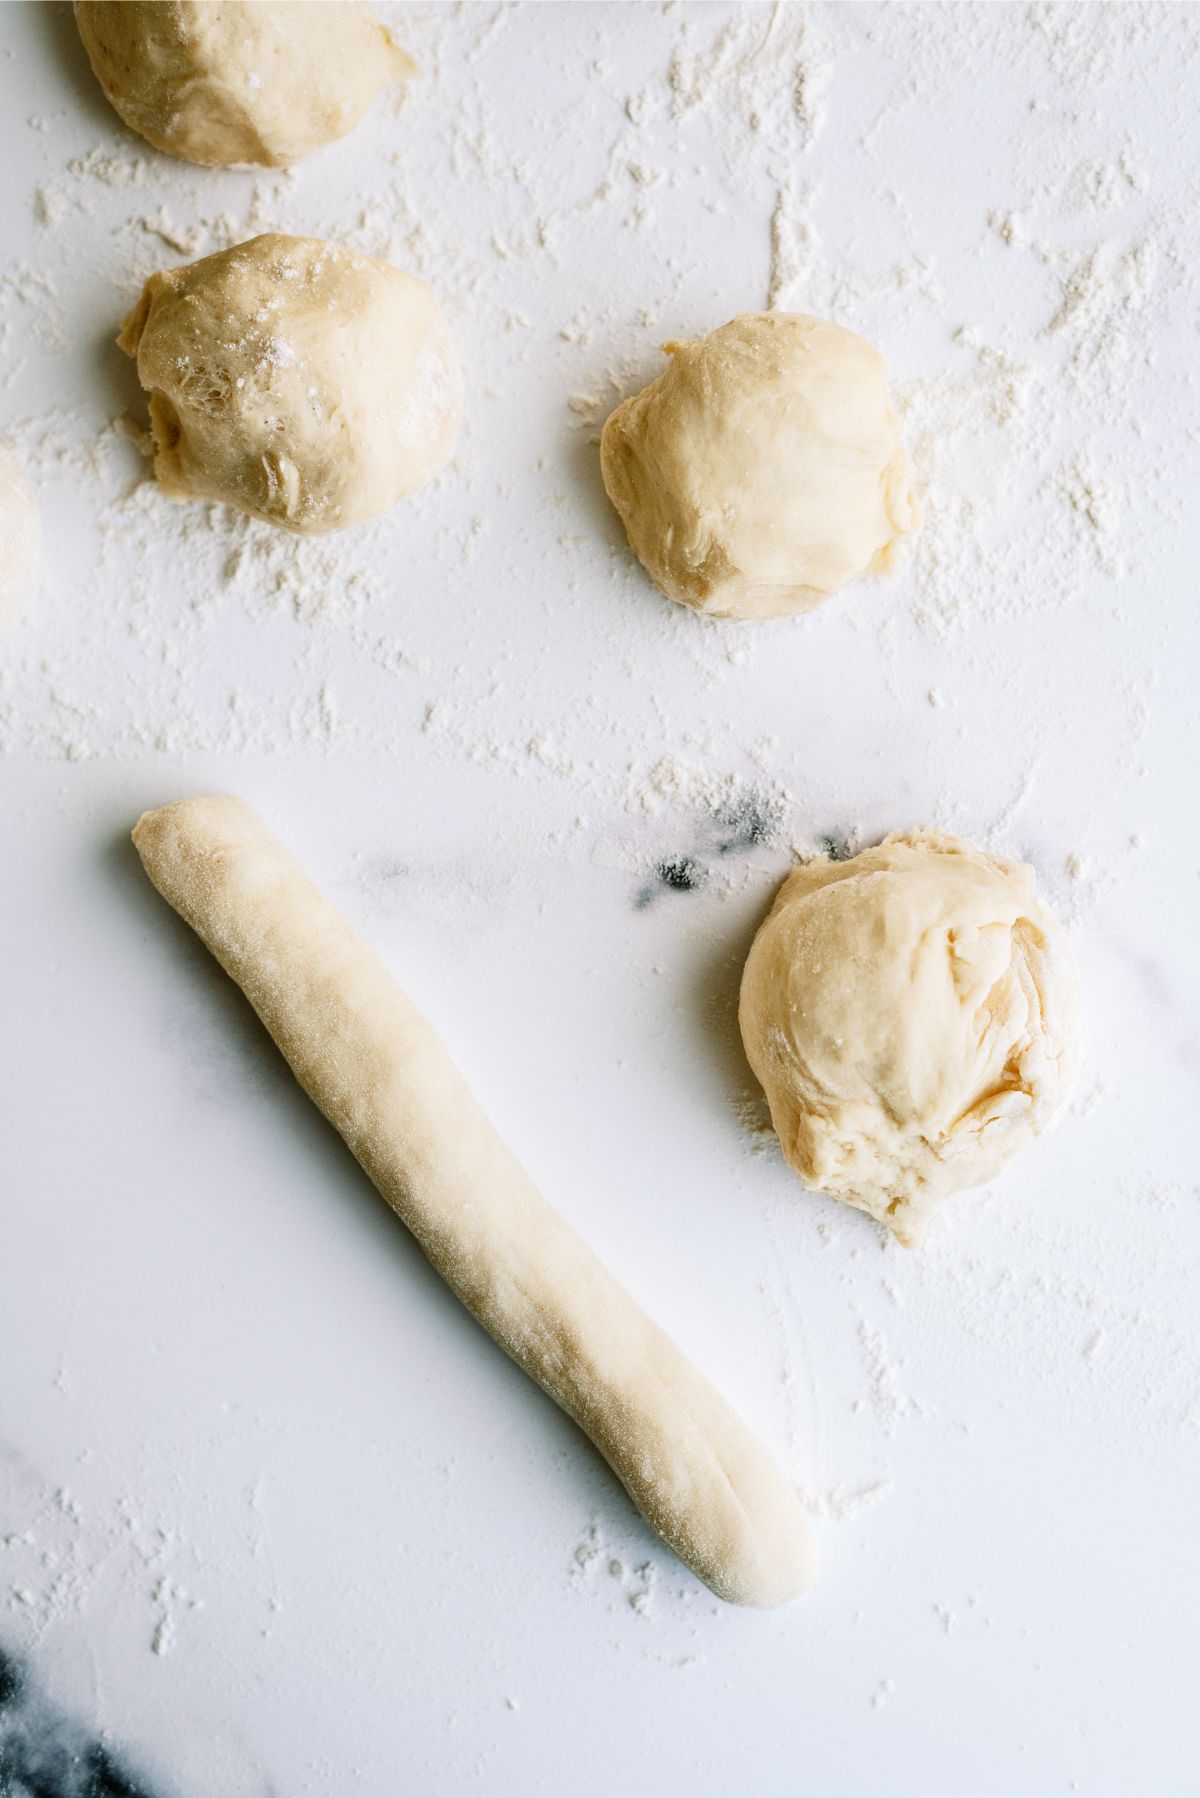 Dough pieces rolled into elongated shapes